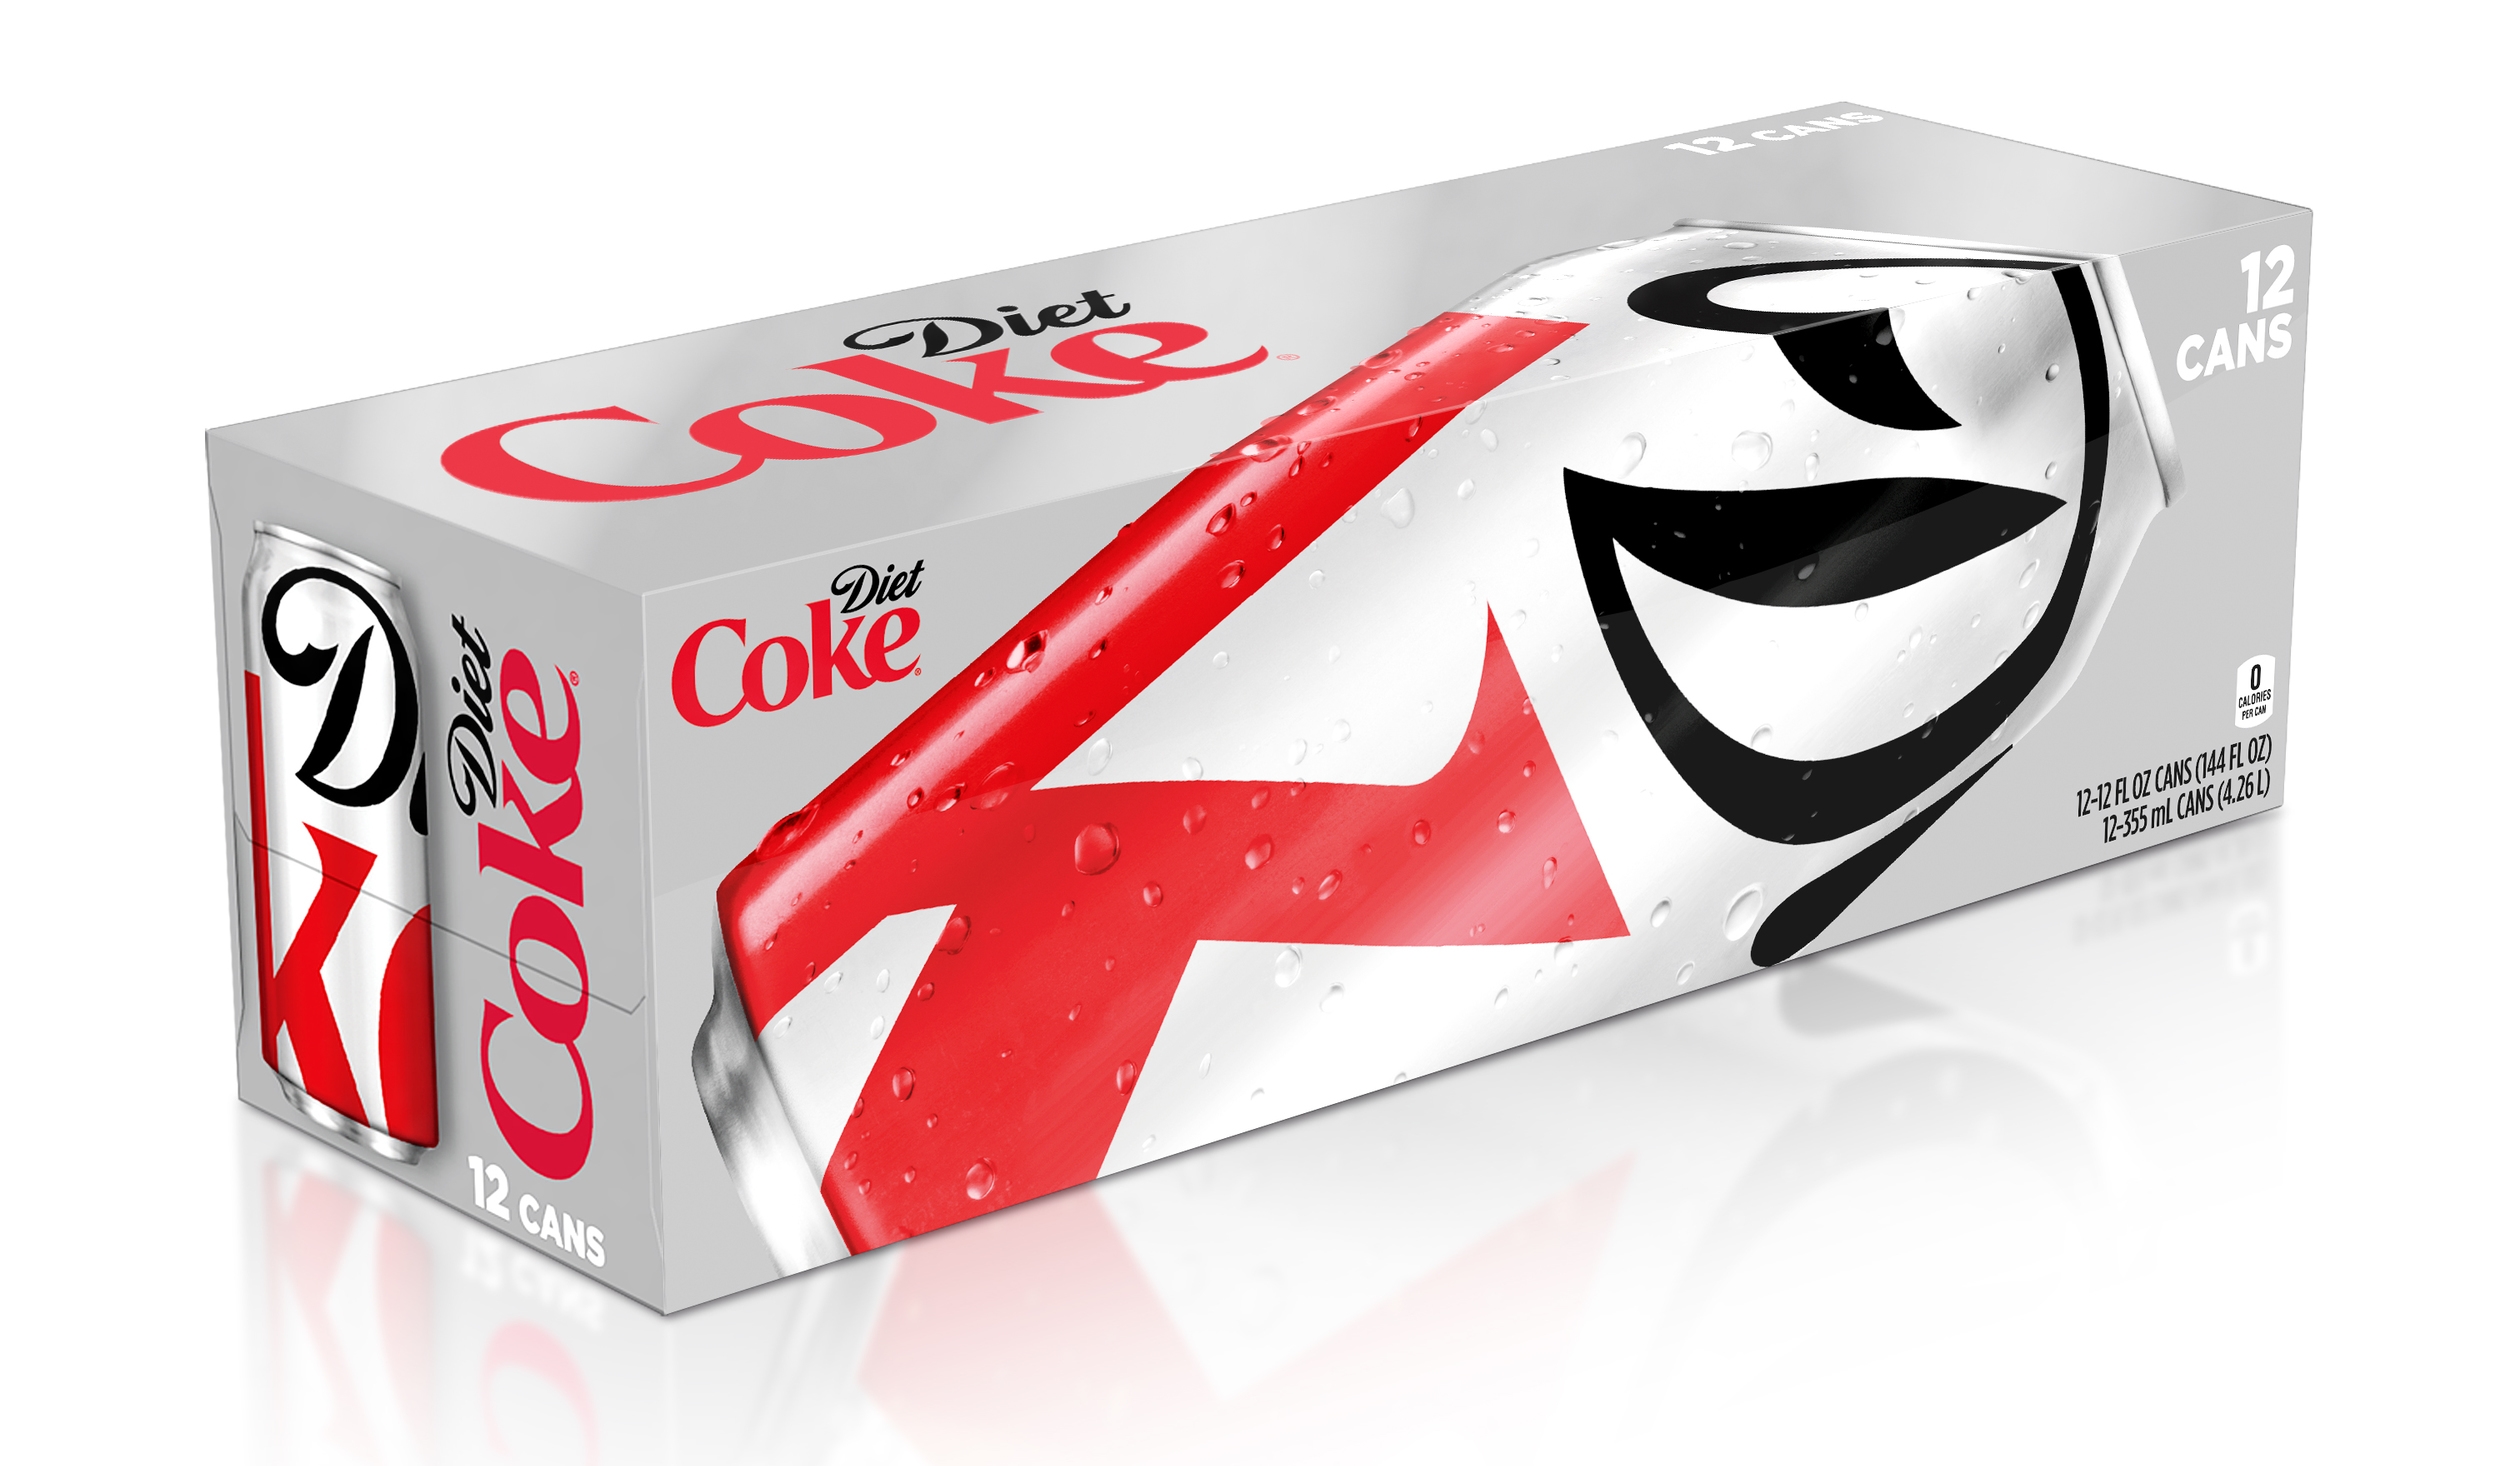  Client: Turner-Duckworth / Coca-Cola  Assignment: Take Adobe Illustrator mechanical and create a photo-realistic 3-D render of product. 